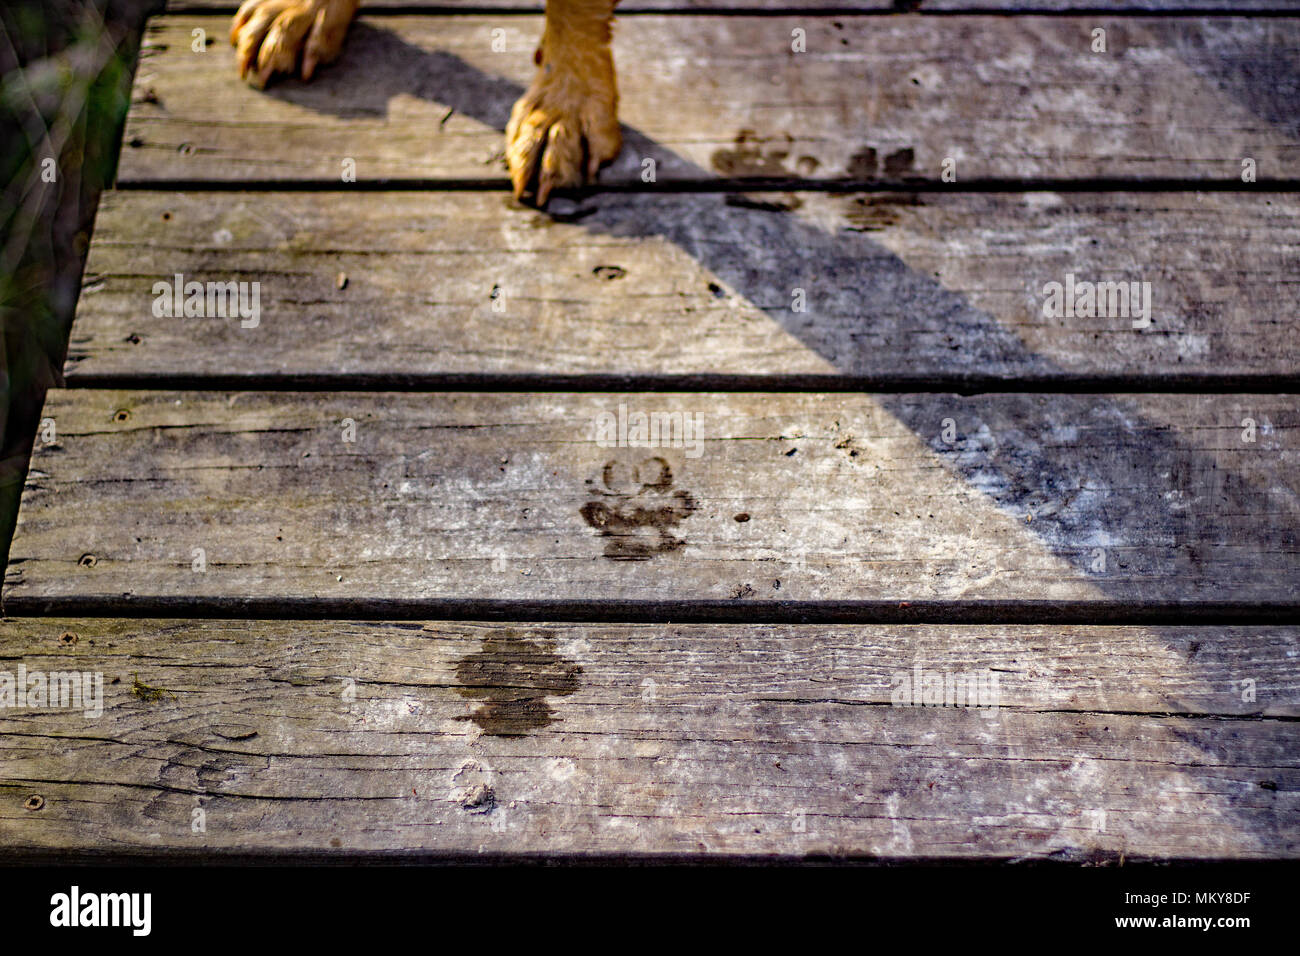 Paw prints glistening at golden hour during spring in the Midwest, USA. Stock Photo